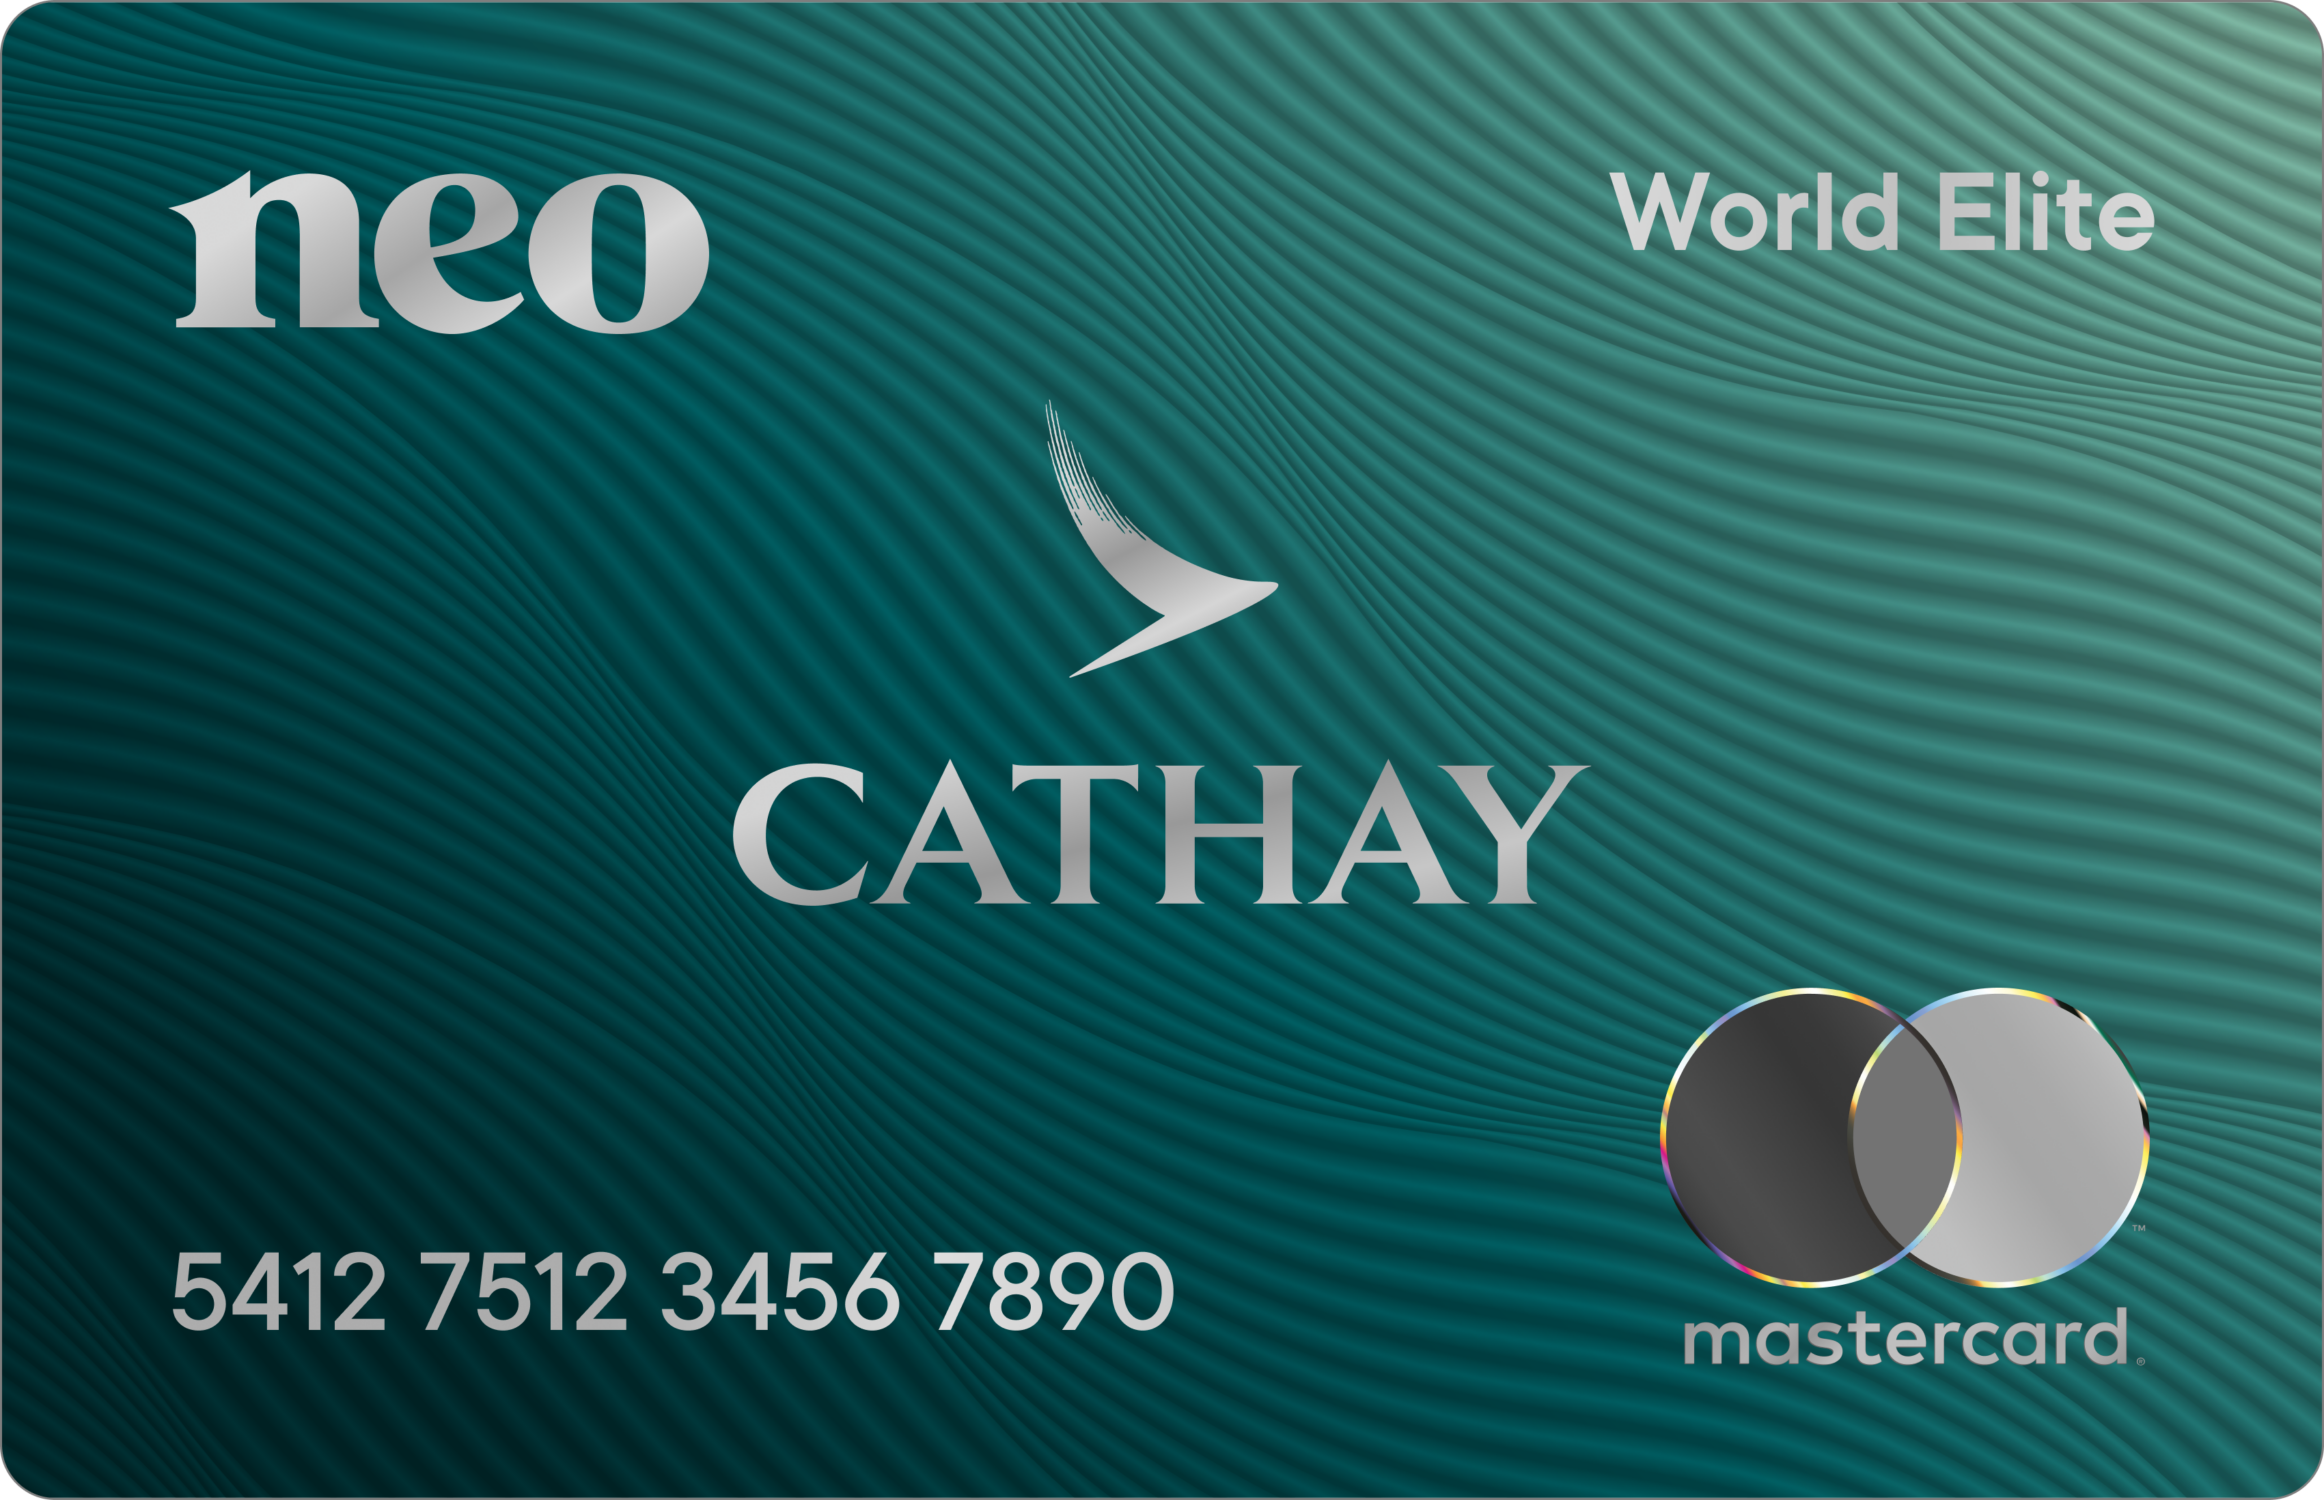 Cathay World Elite Mastercard powered by Neo (not available in QC)